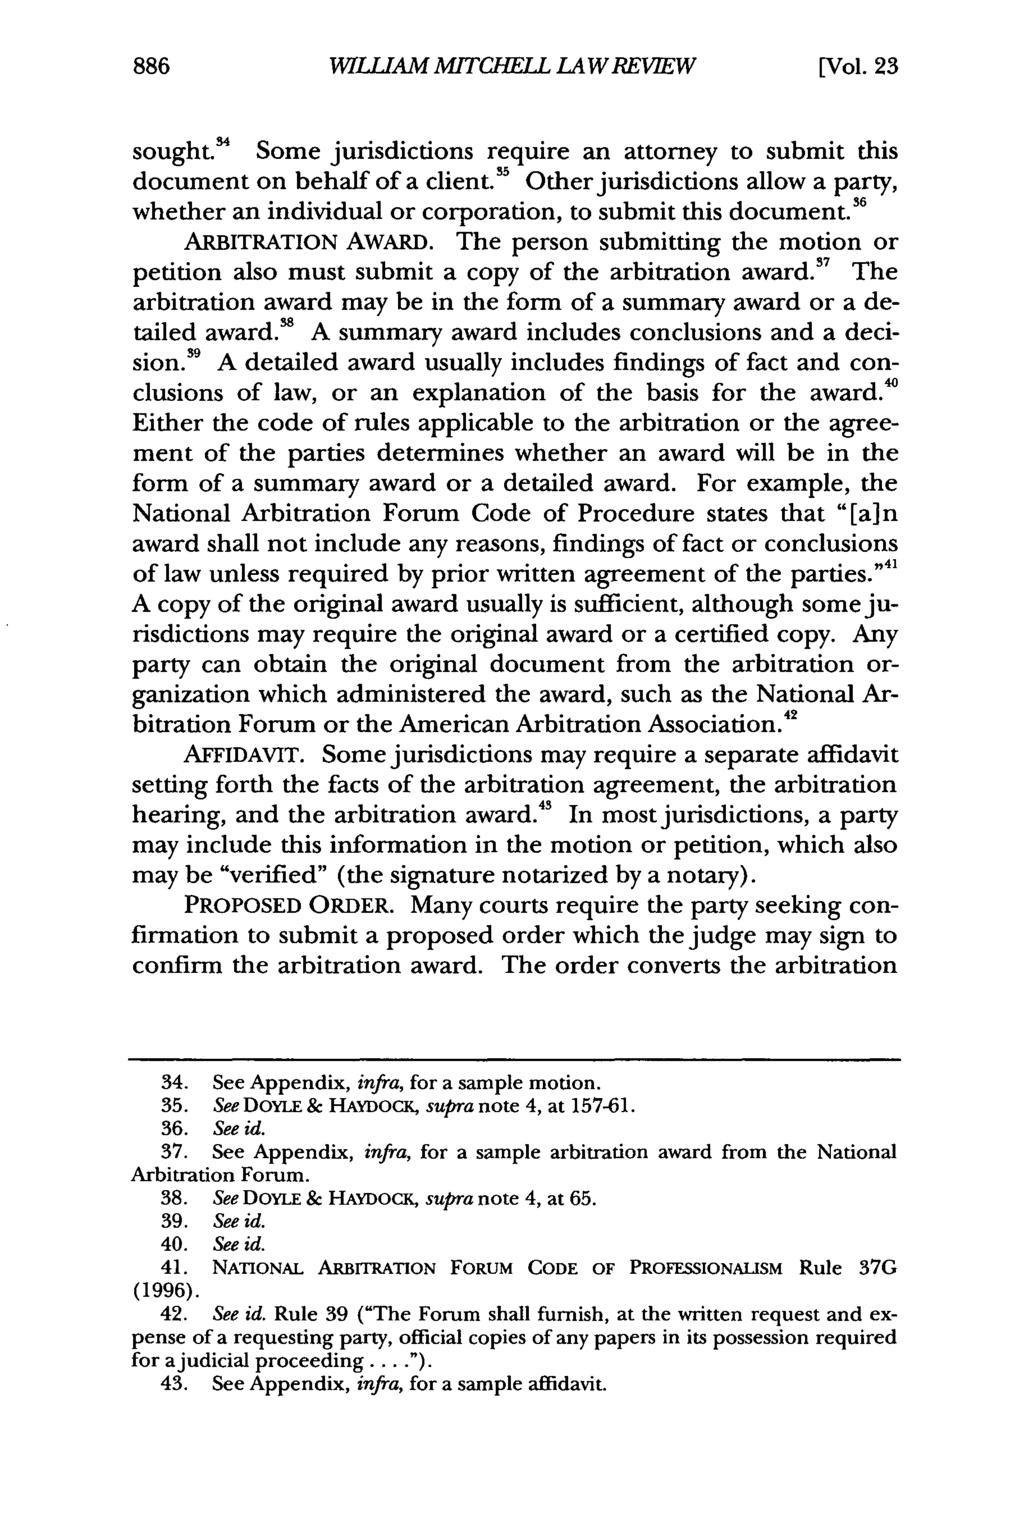 William W/L!AM Mitchell Law MITCHELL Review, Vol. 23, LAW Iss. 4 REVIEW [1997], Art. 4 [Vol. 23 sought." Some jurisdictions require an attorney to submit this document on behalf of a client.